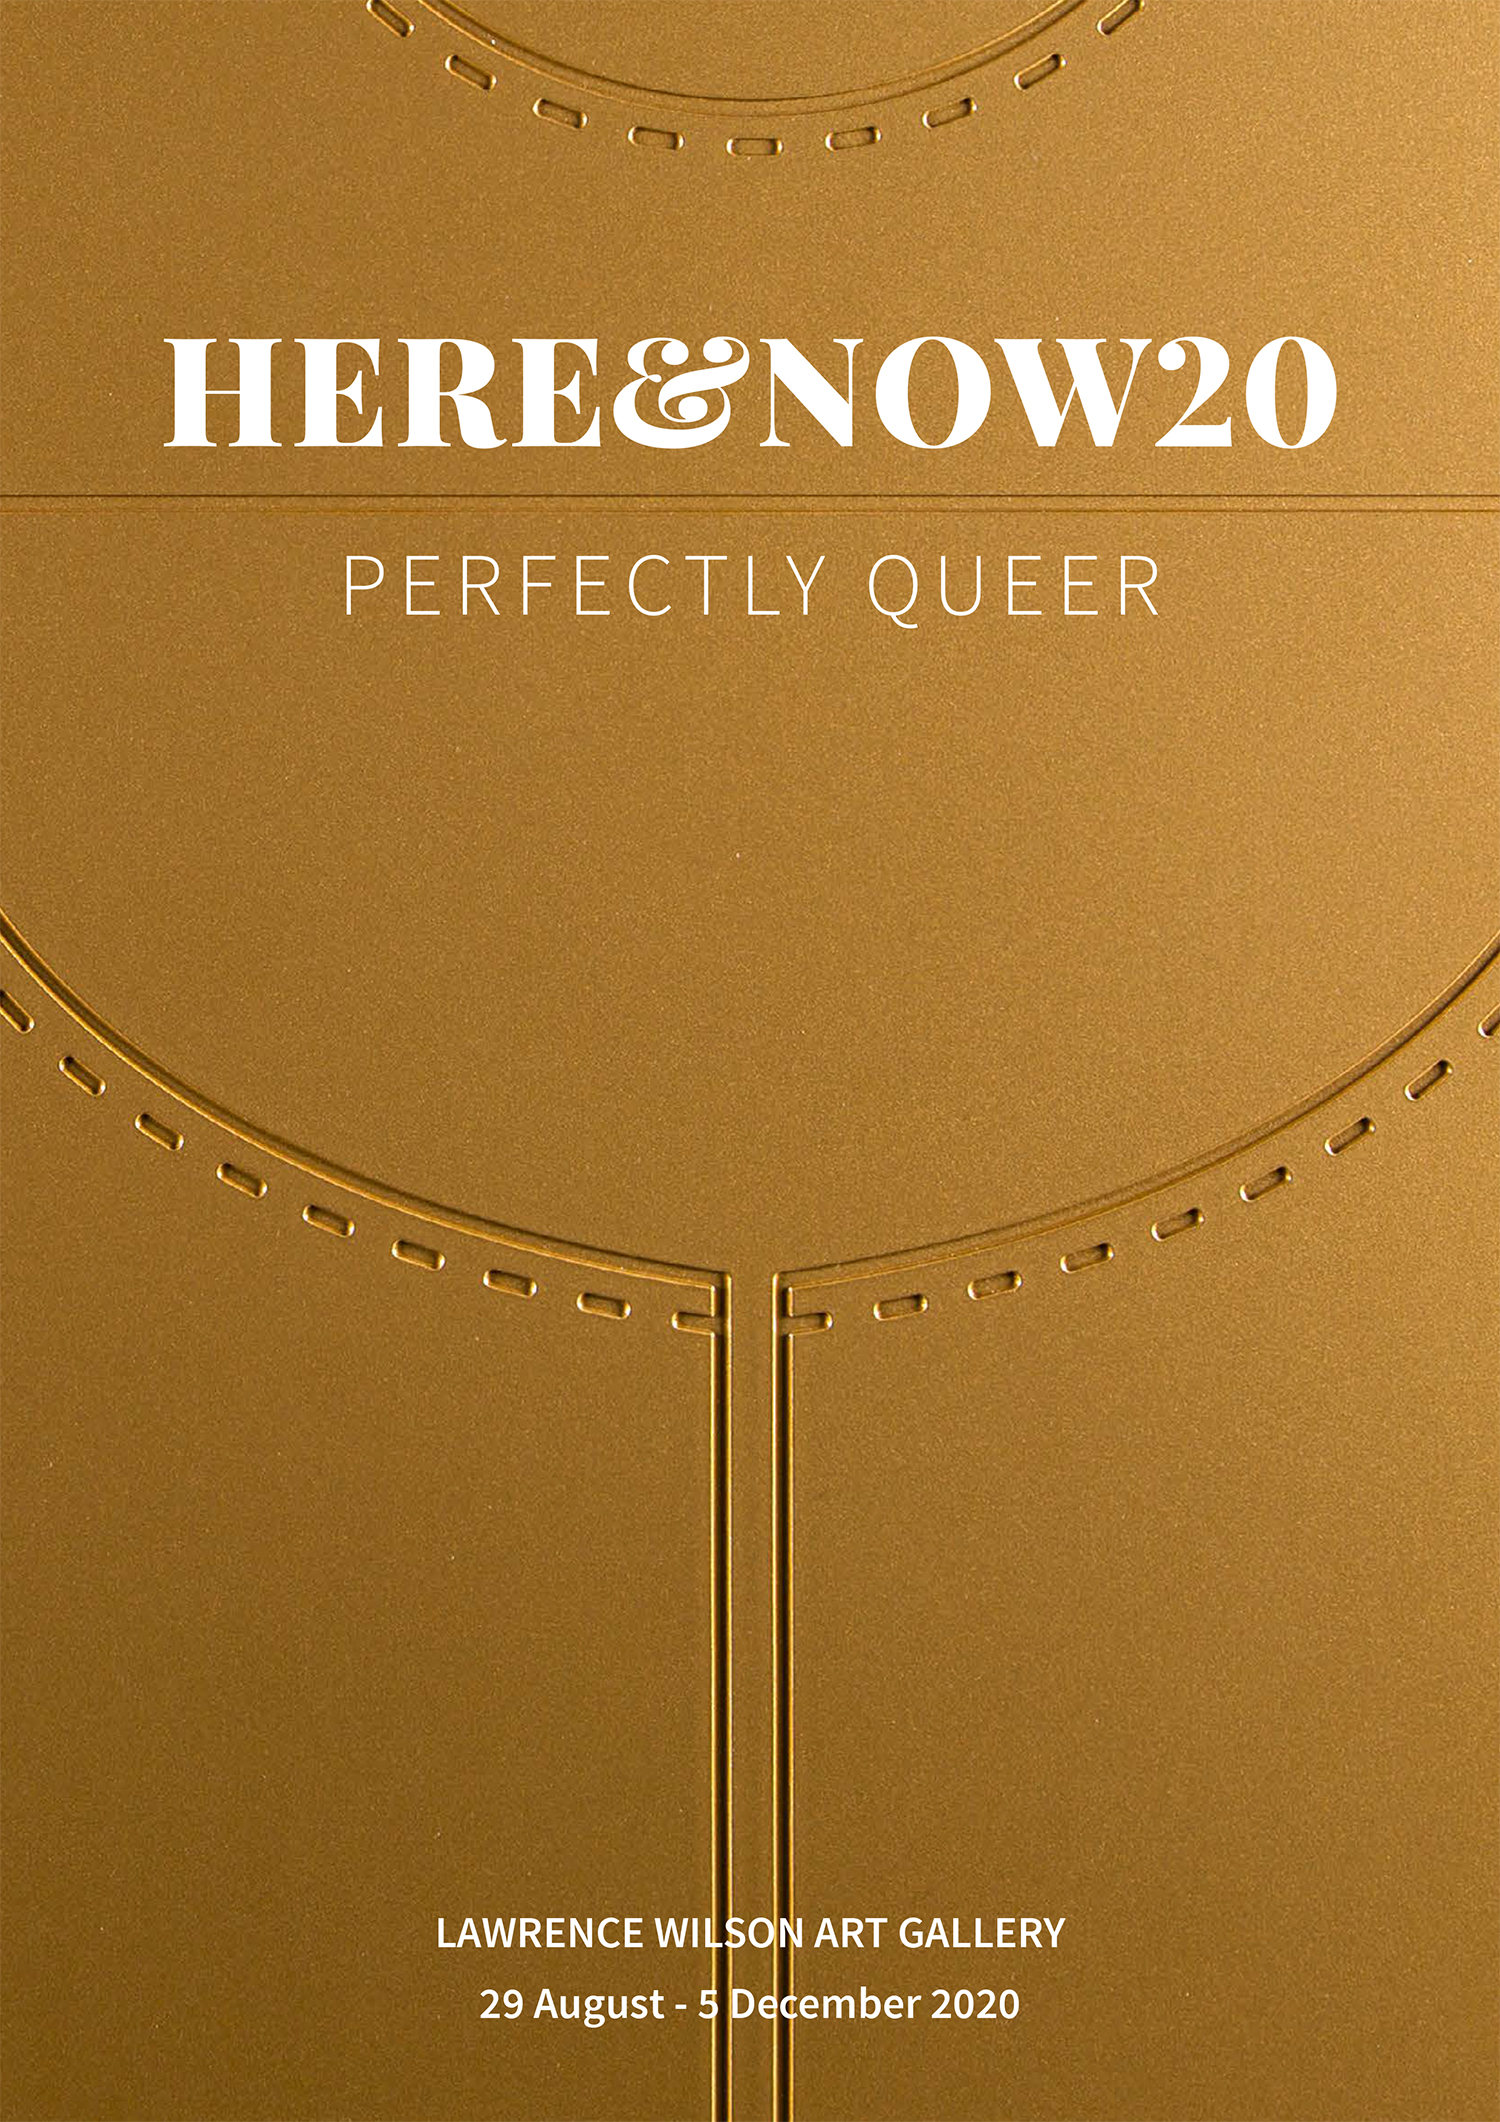 Cover of the HERE&NOW20 gatefold catalogue, featuring a shiny gold detail of artwork by Benjamin Bannan.